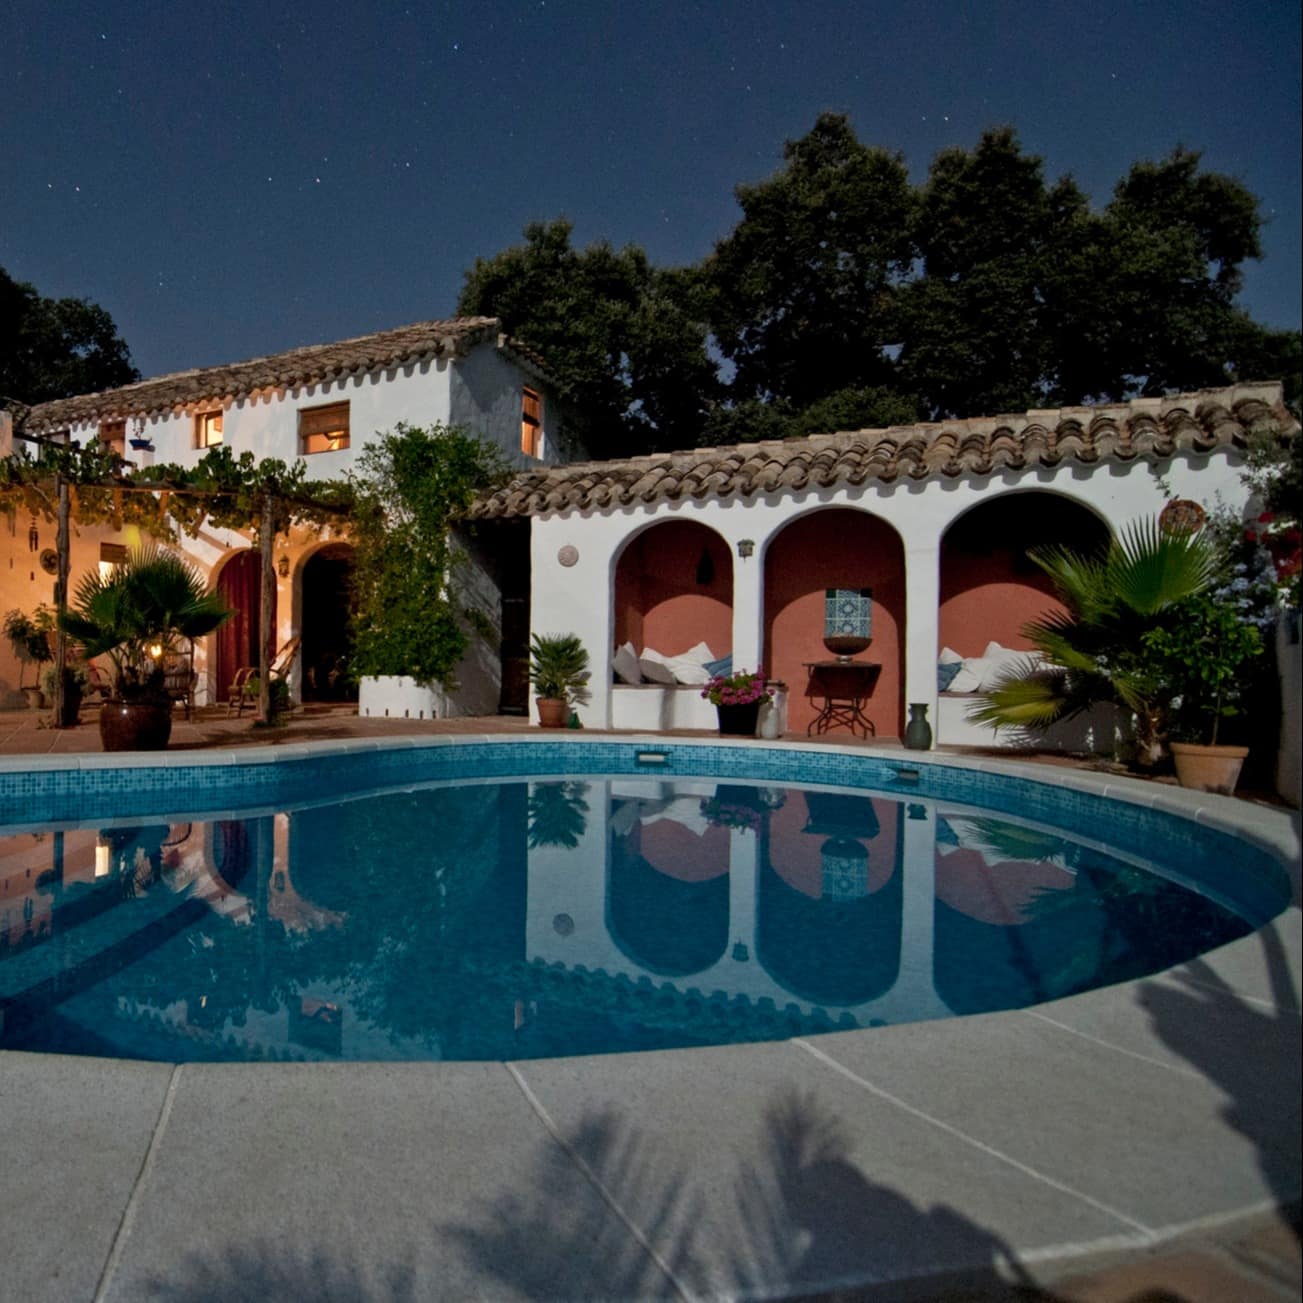 A traditional Spanish mansion at night with a pool out front